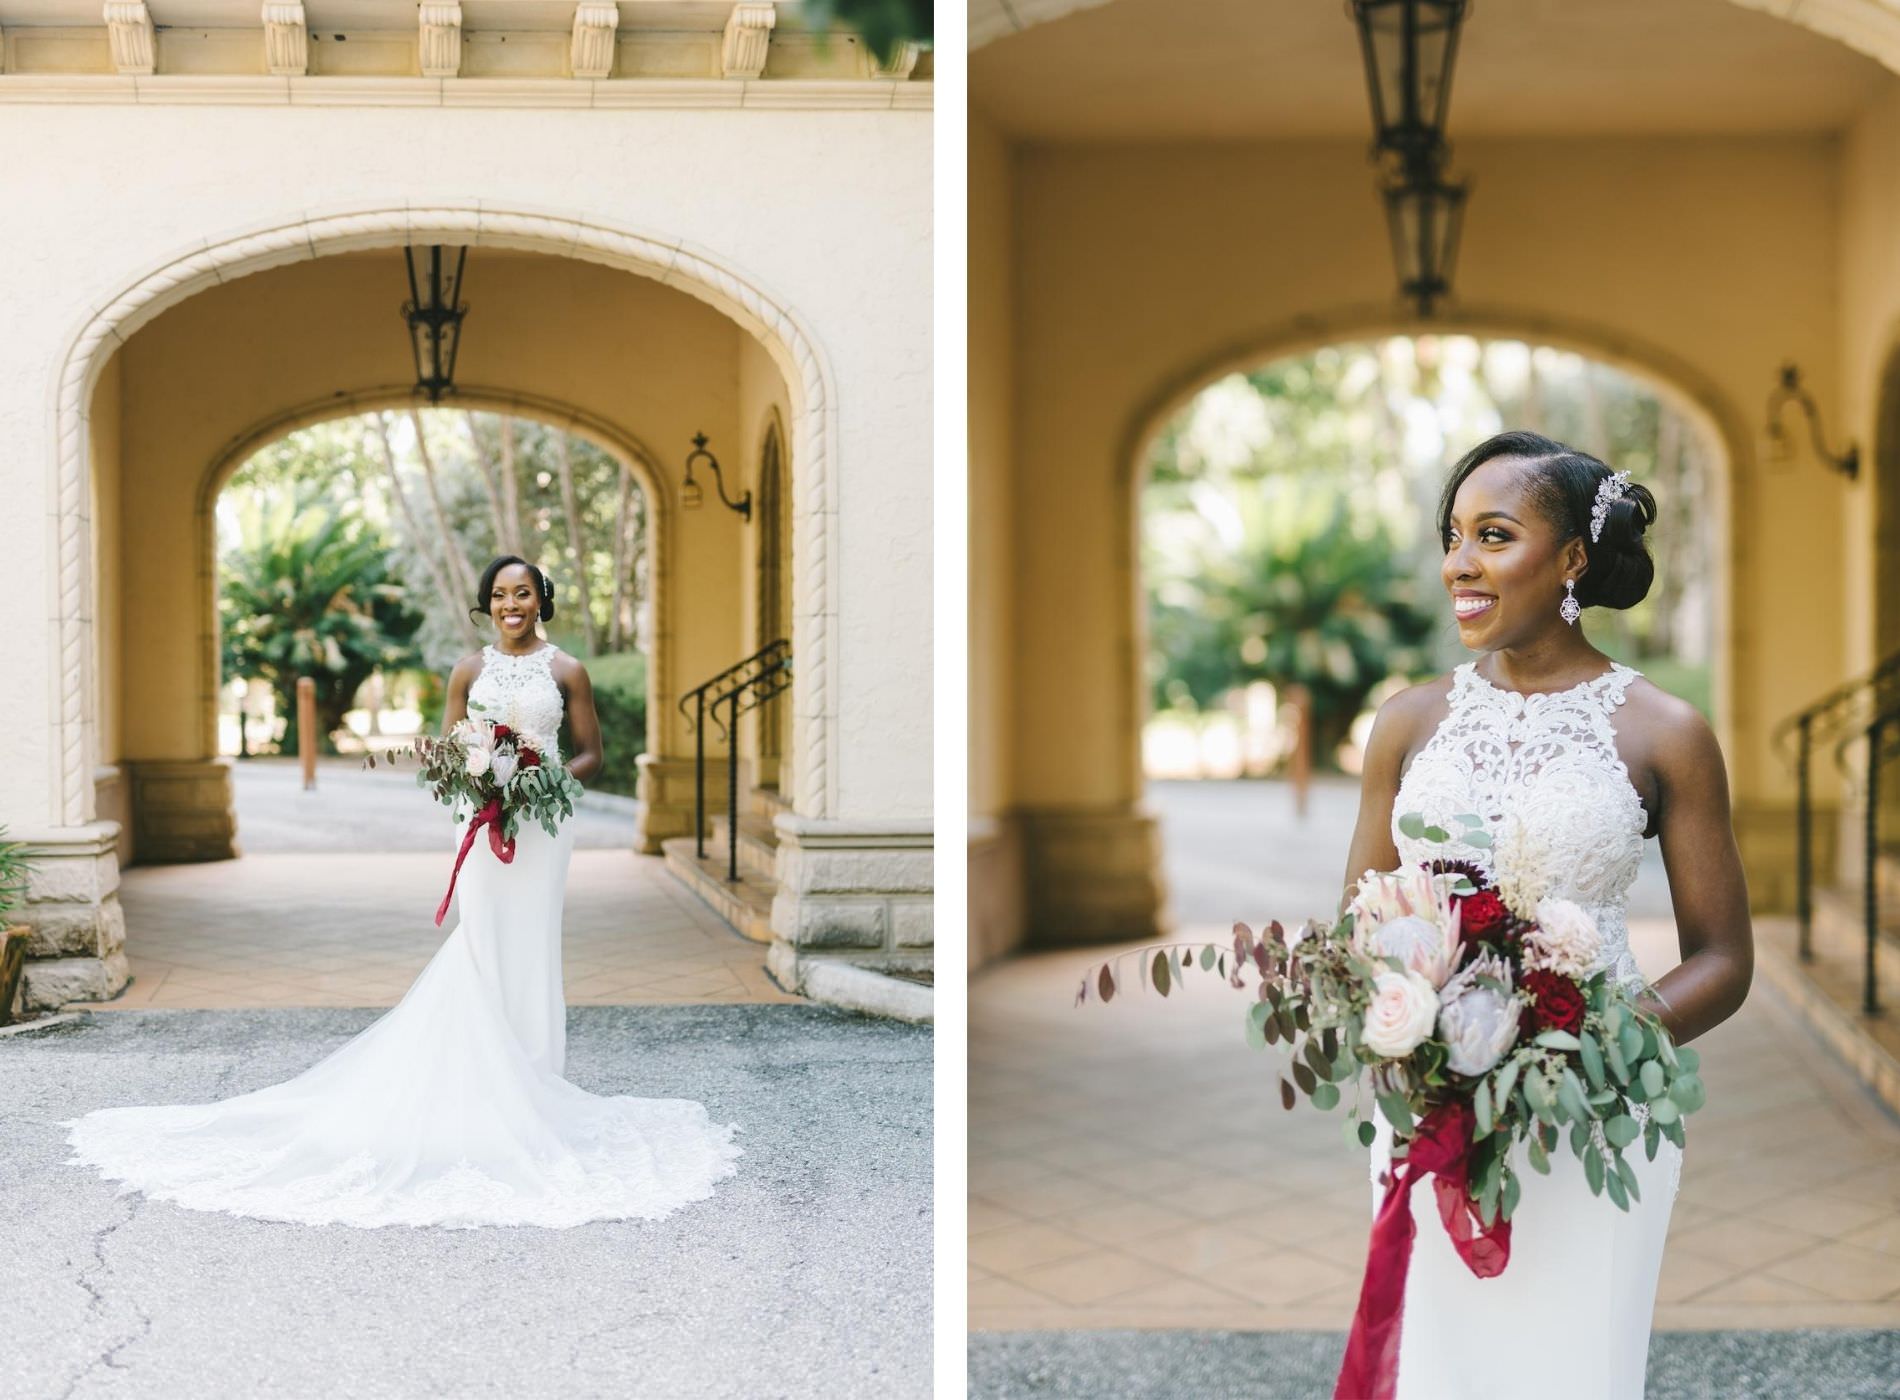 Romantic Florida Bride Wedding Portrait Outside Historic Powel Crosley Estate in Sarasota, Bride Holding Romantic Bridal Bouquet with Blush Pink King Protea, Red Roses, Burgundy Bow, Eucalyptus Leaf Greenery and Boysenberry, Wearing Fitted Halter Lace Wedding Dress | Tampa Bay Wedding Photographer Kera Photography